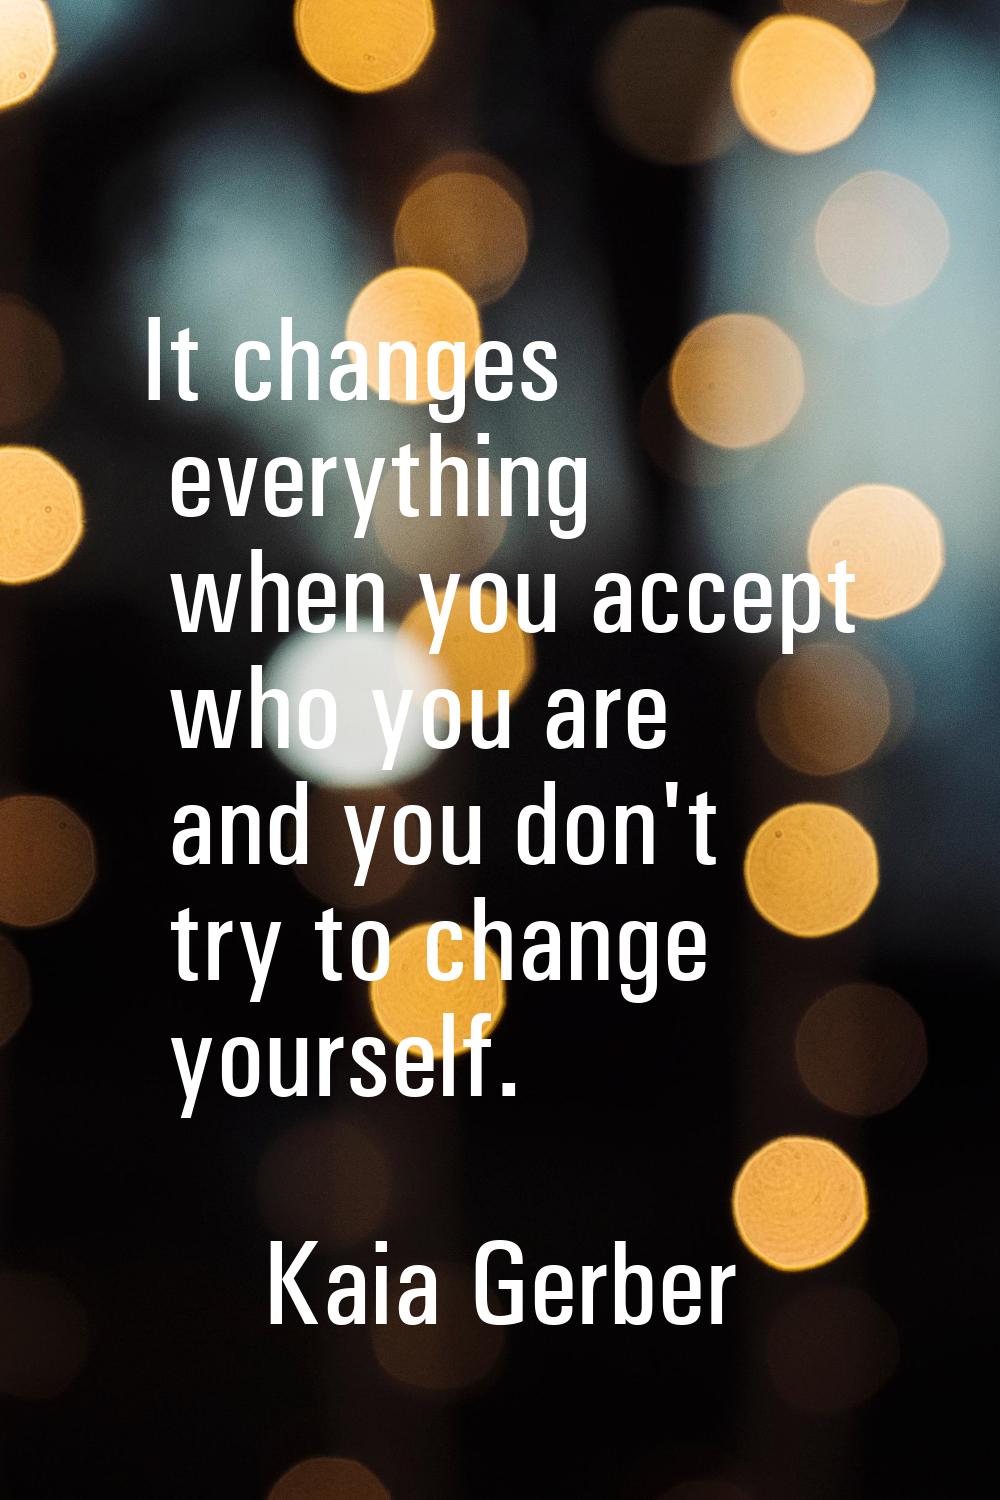 It changes everything when you accept who you are and you don't try to change yourself.